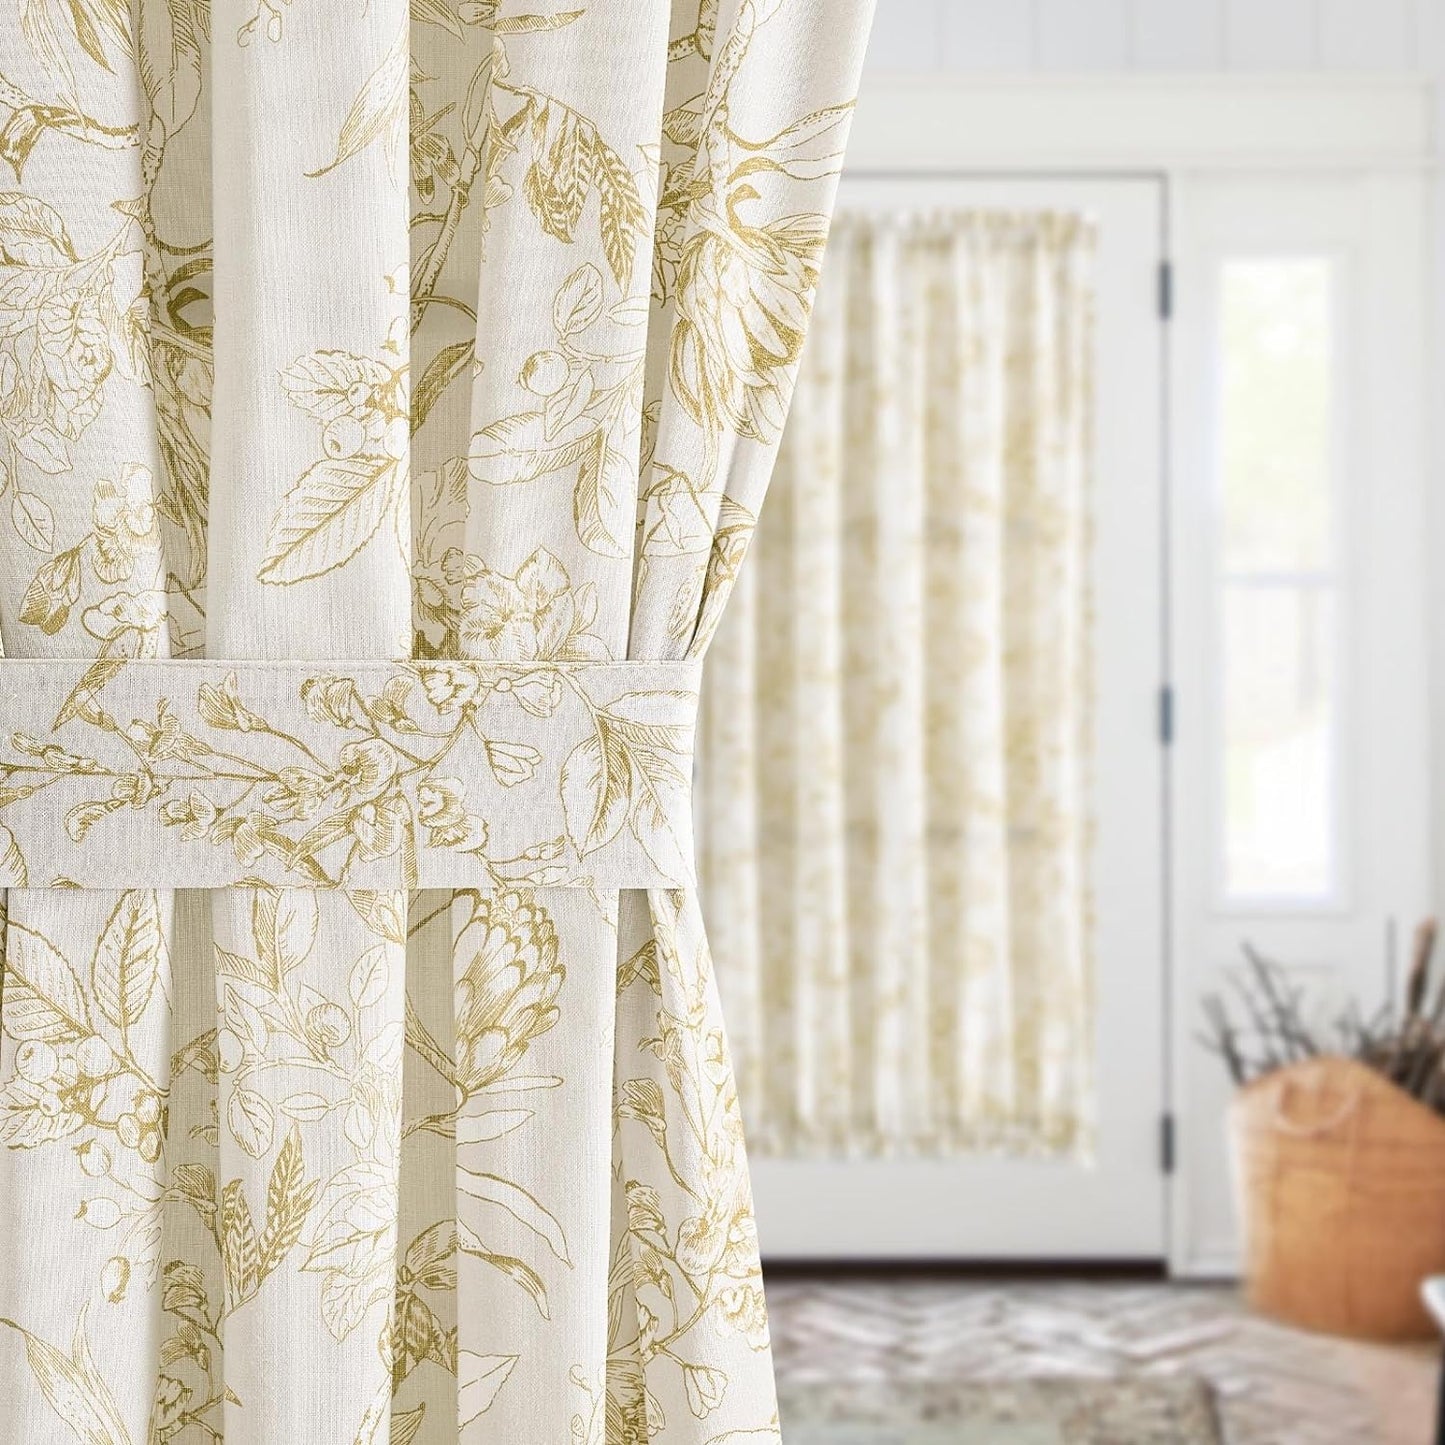 Jinchan French Door Curtain Farmhouse Floral Linen Curtain for Sliding Glass Door 72 Inches 1 Panel with Tieback Light Filtering Curtain for Door Window Patio Rod Pocket Yellow on Beige  CKNY HOME FASHION   